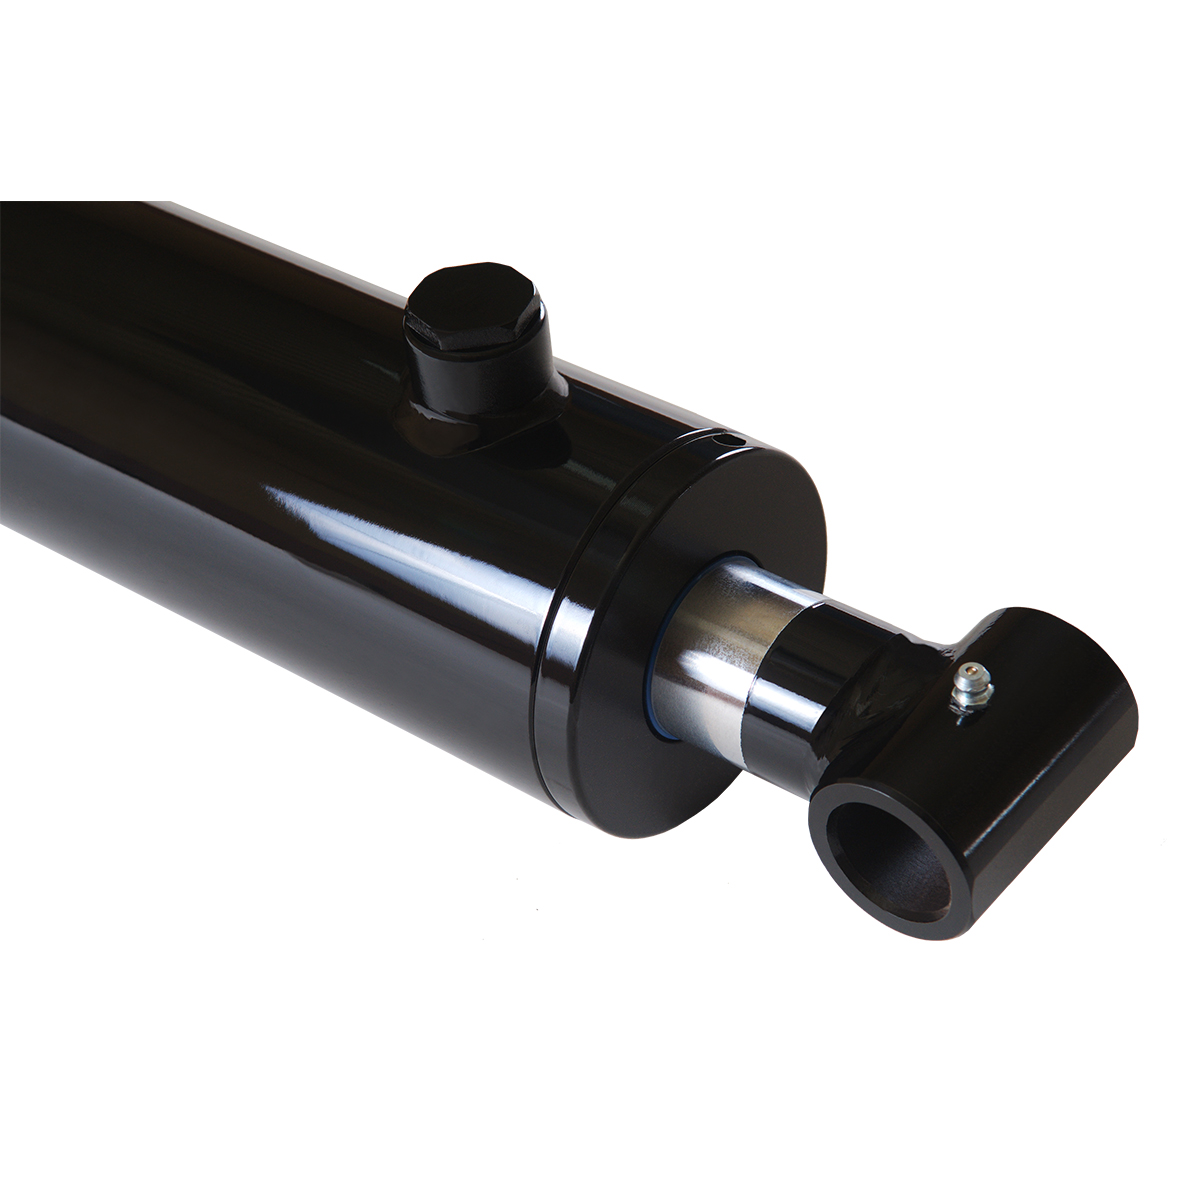 WEN WT3008 Cross Tube Hydraulic Cylinder with 3-inch Bore and 8-inch Stroke 